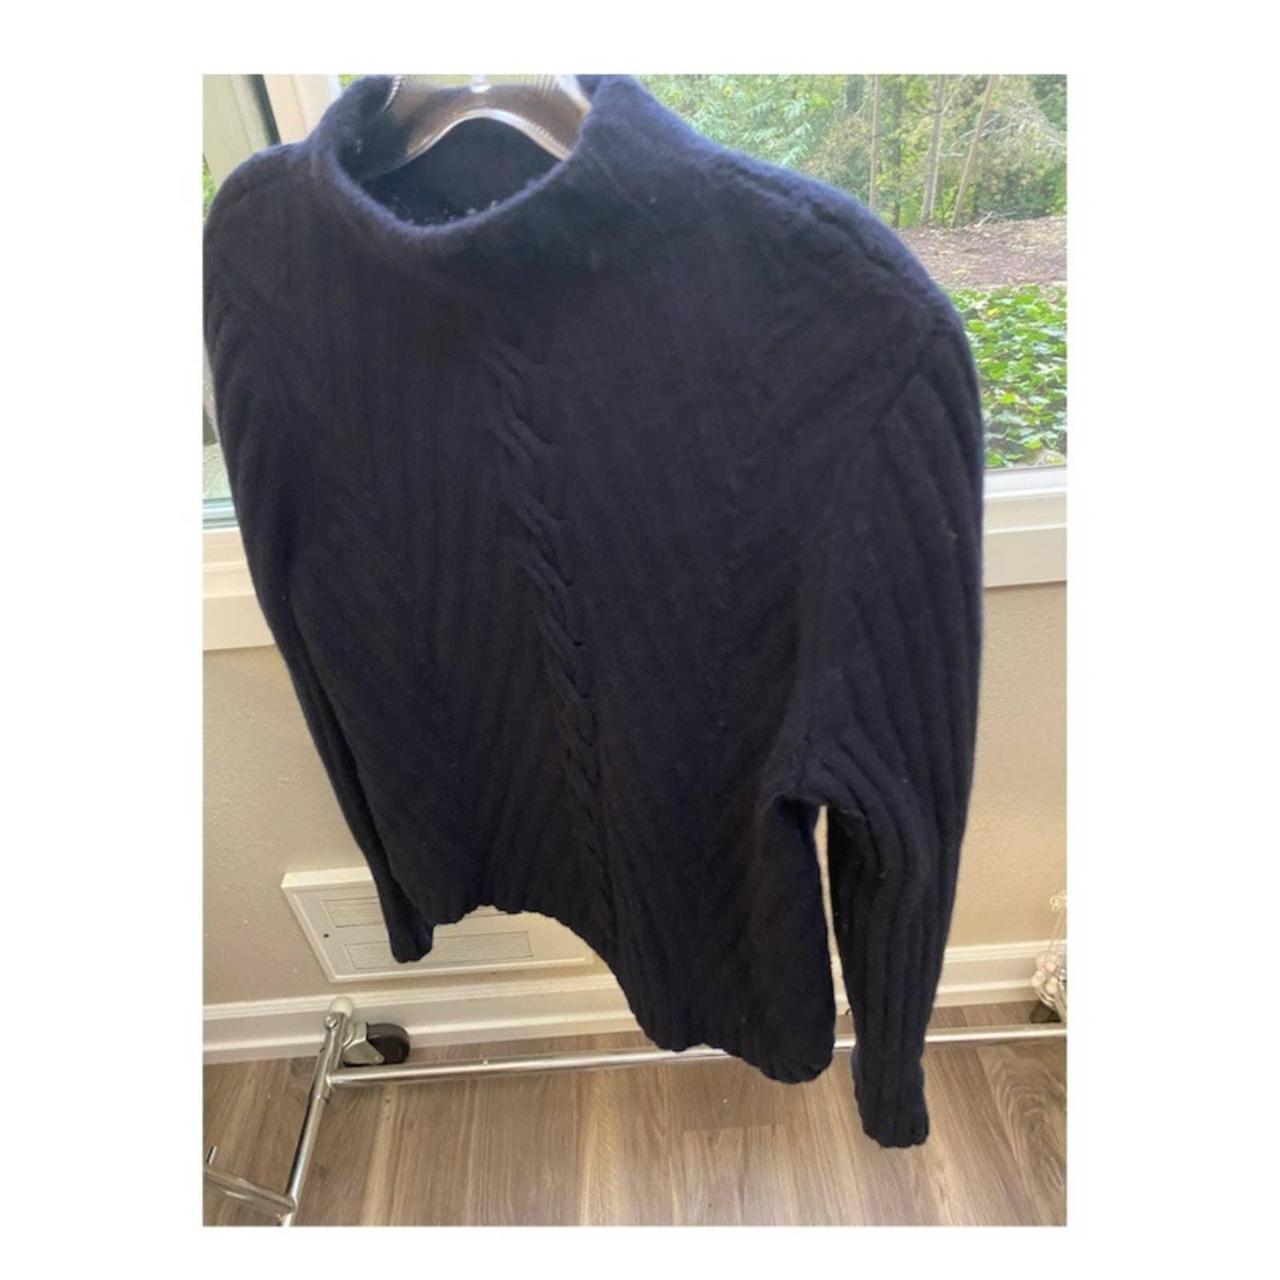 Product Image 4 - Cable Knit Wool Sweater

East coast